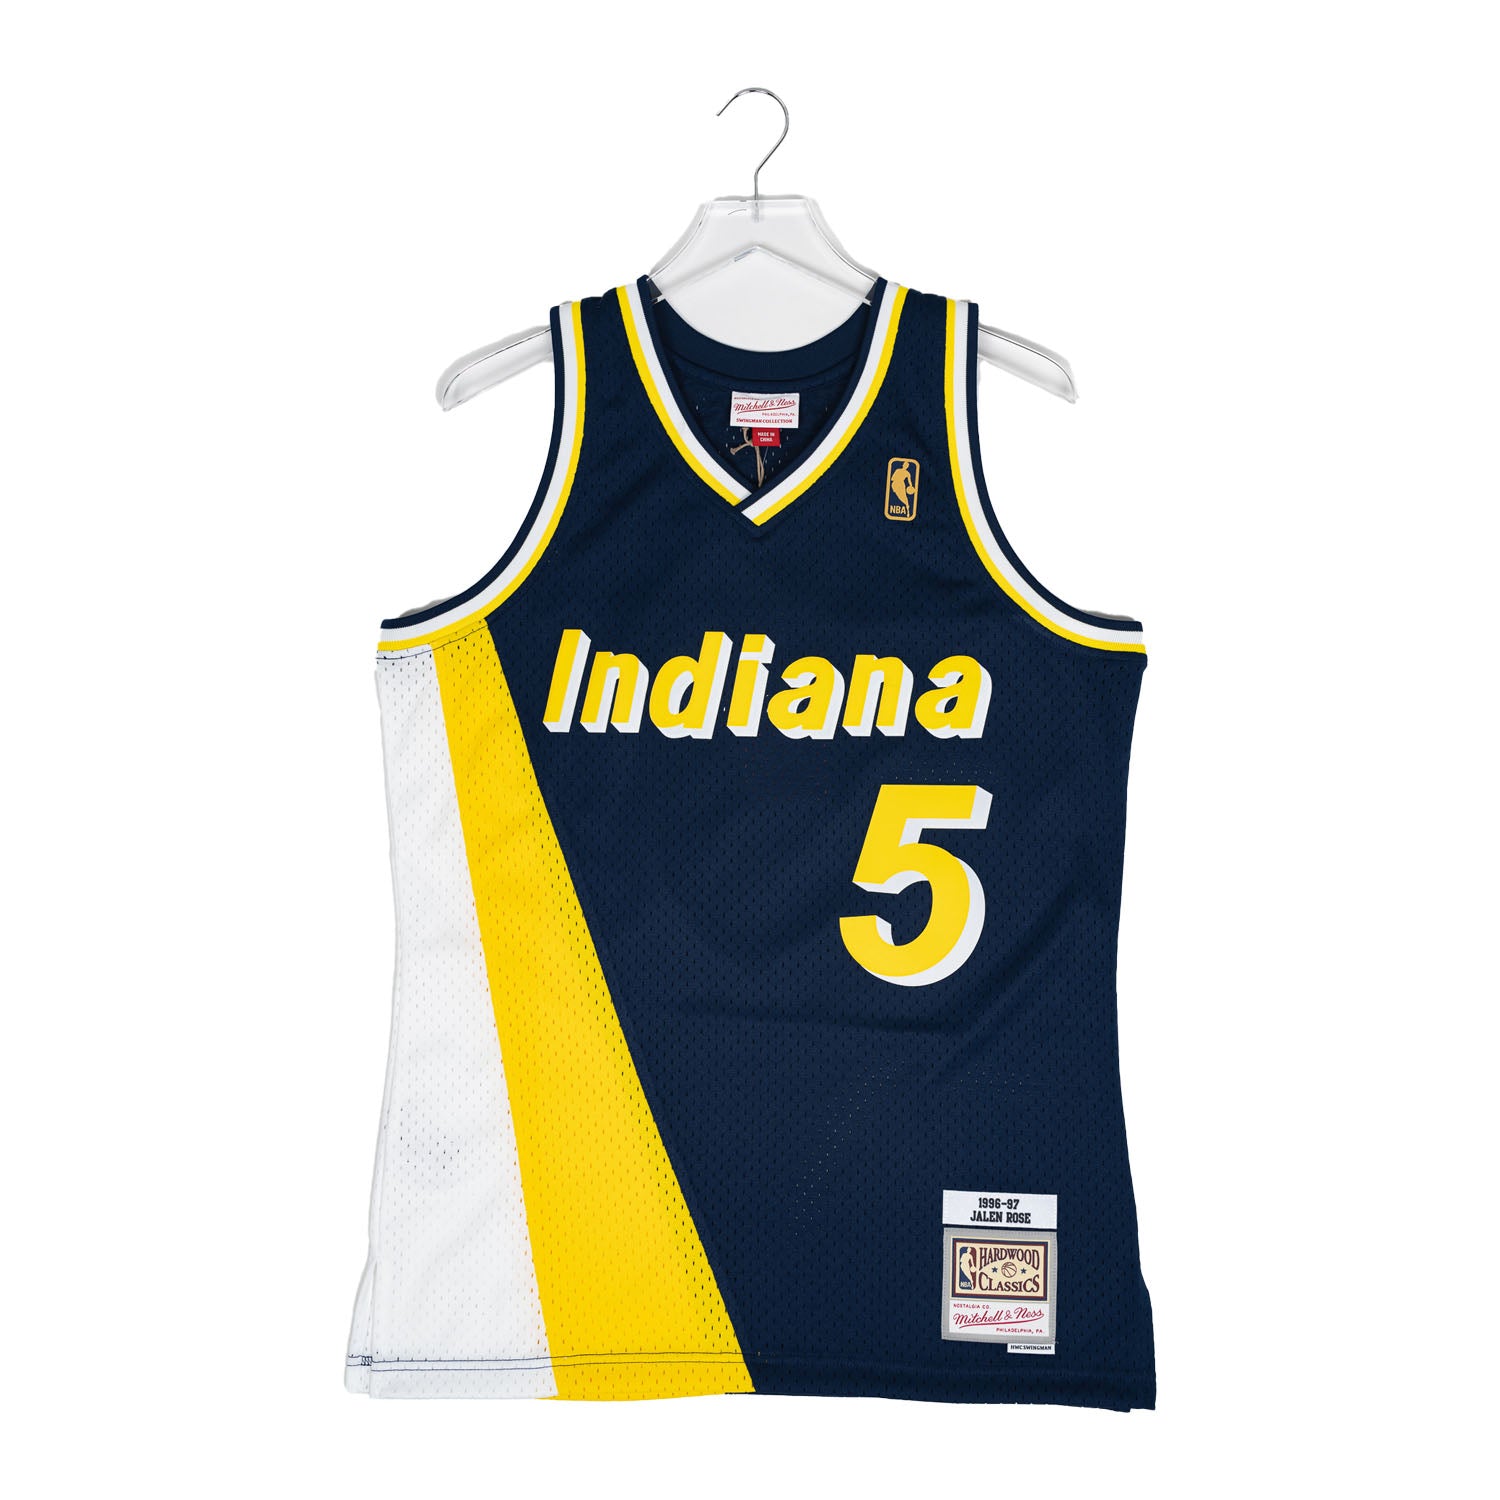 Pacers Jersey 